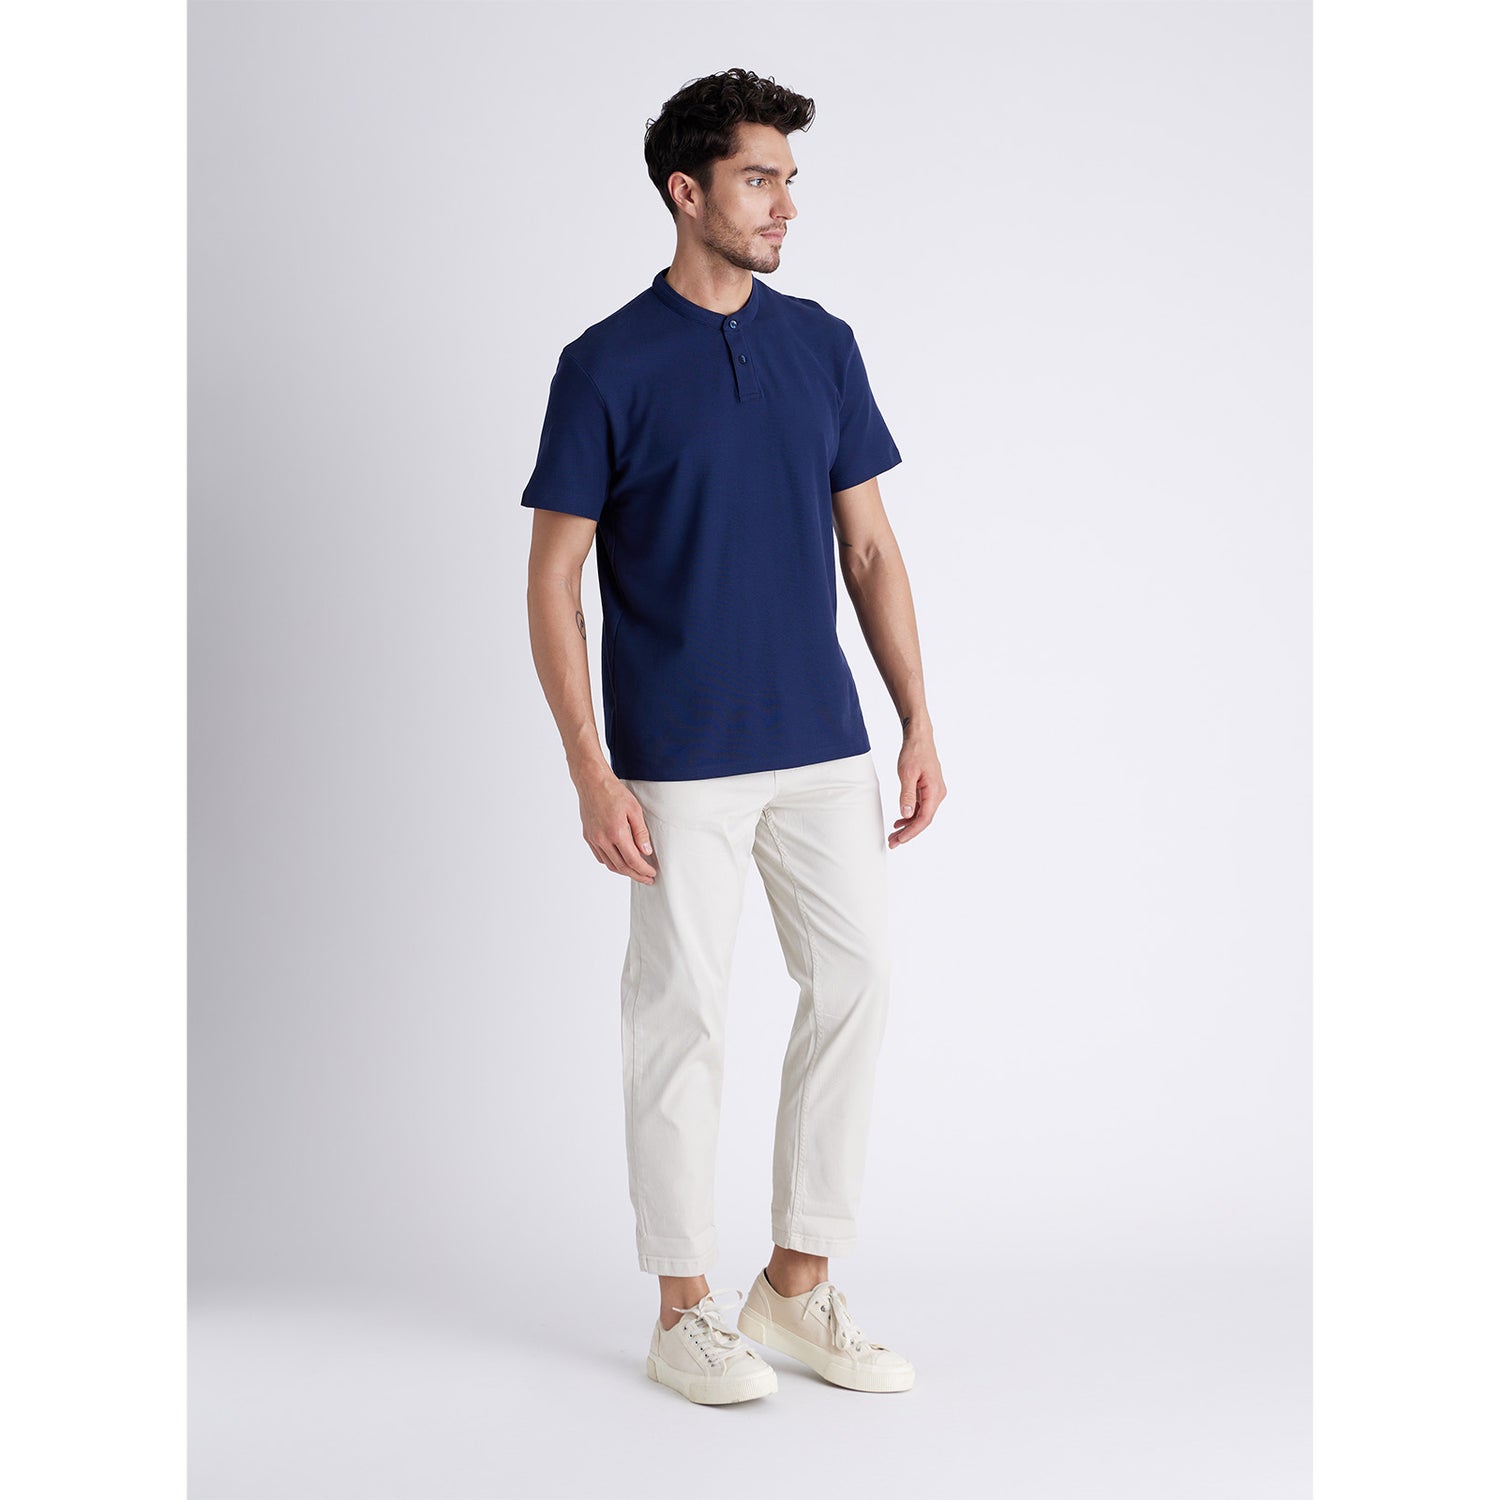 Polo shirt x slacks coordinate special! Introducing classic summer outfits  that can also be applied to Cool Biz! | Men's Fashion Media OTOKOMAE